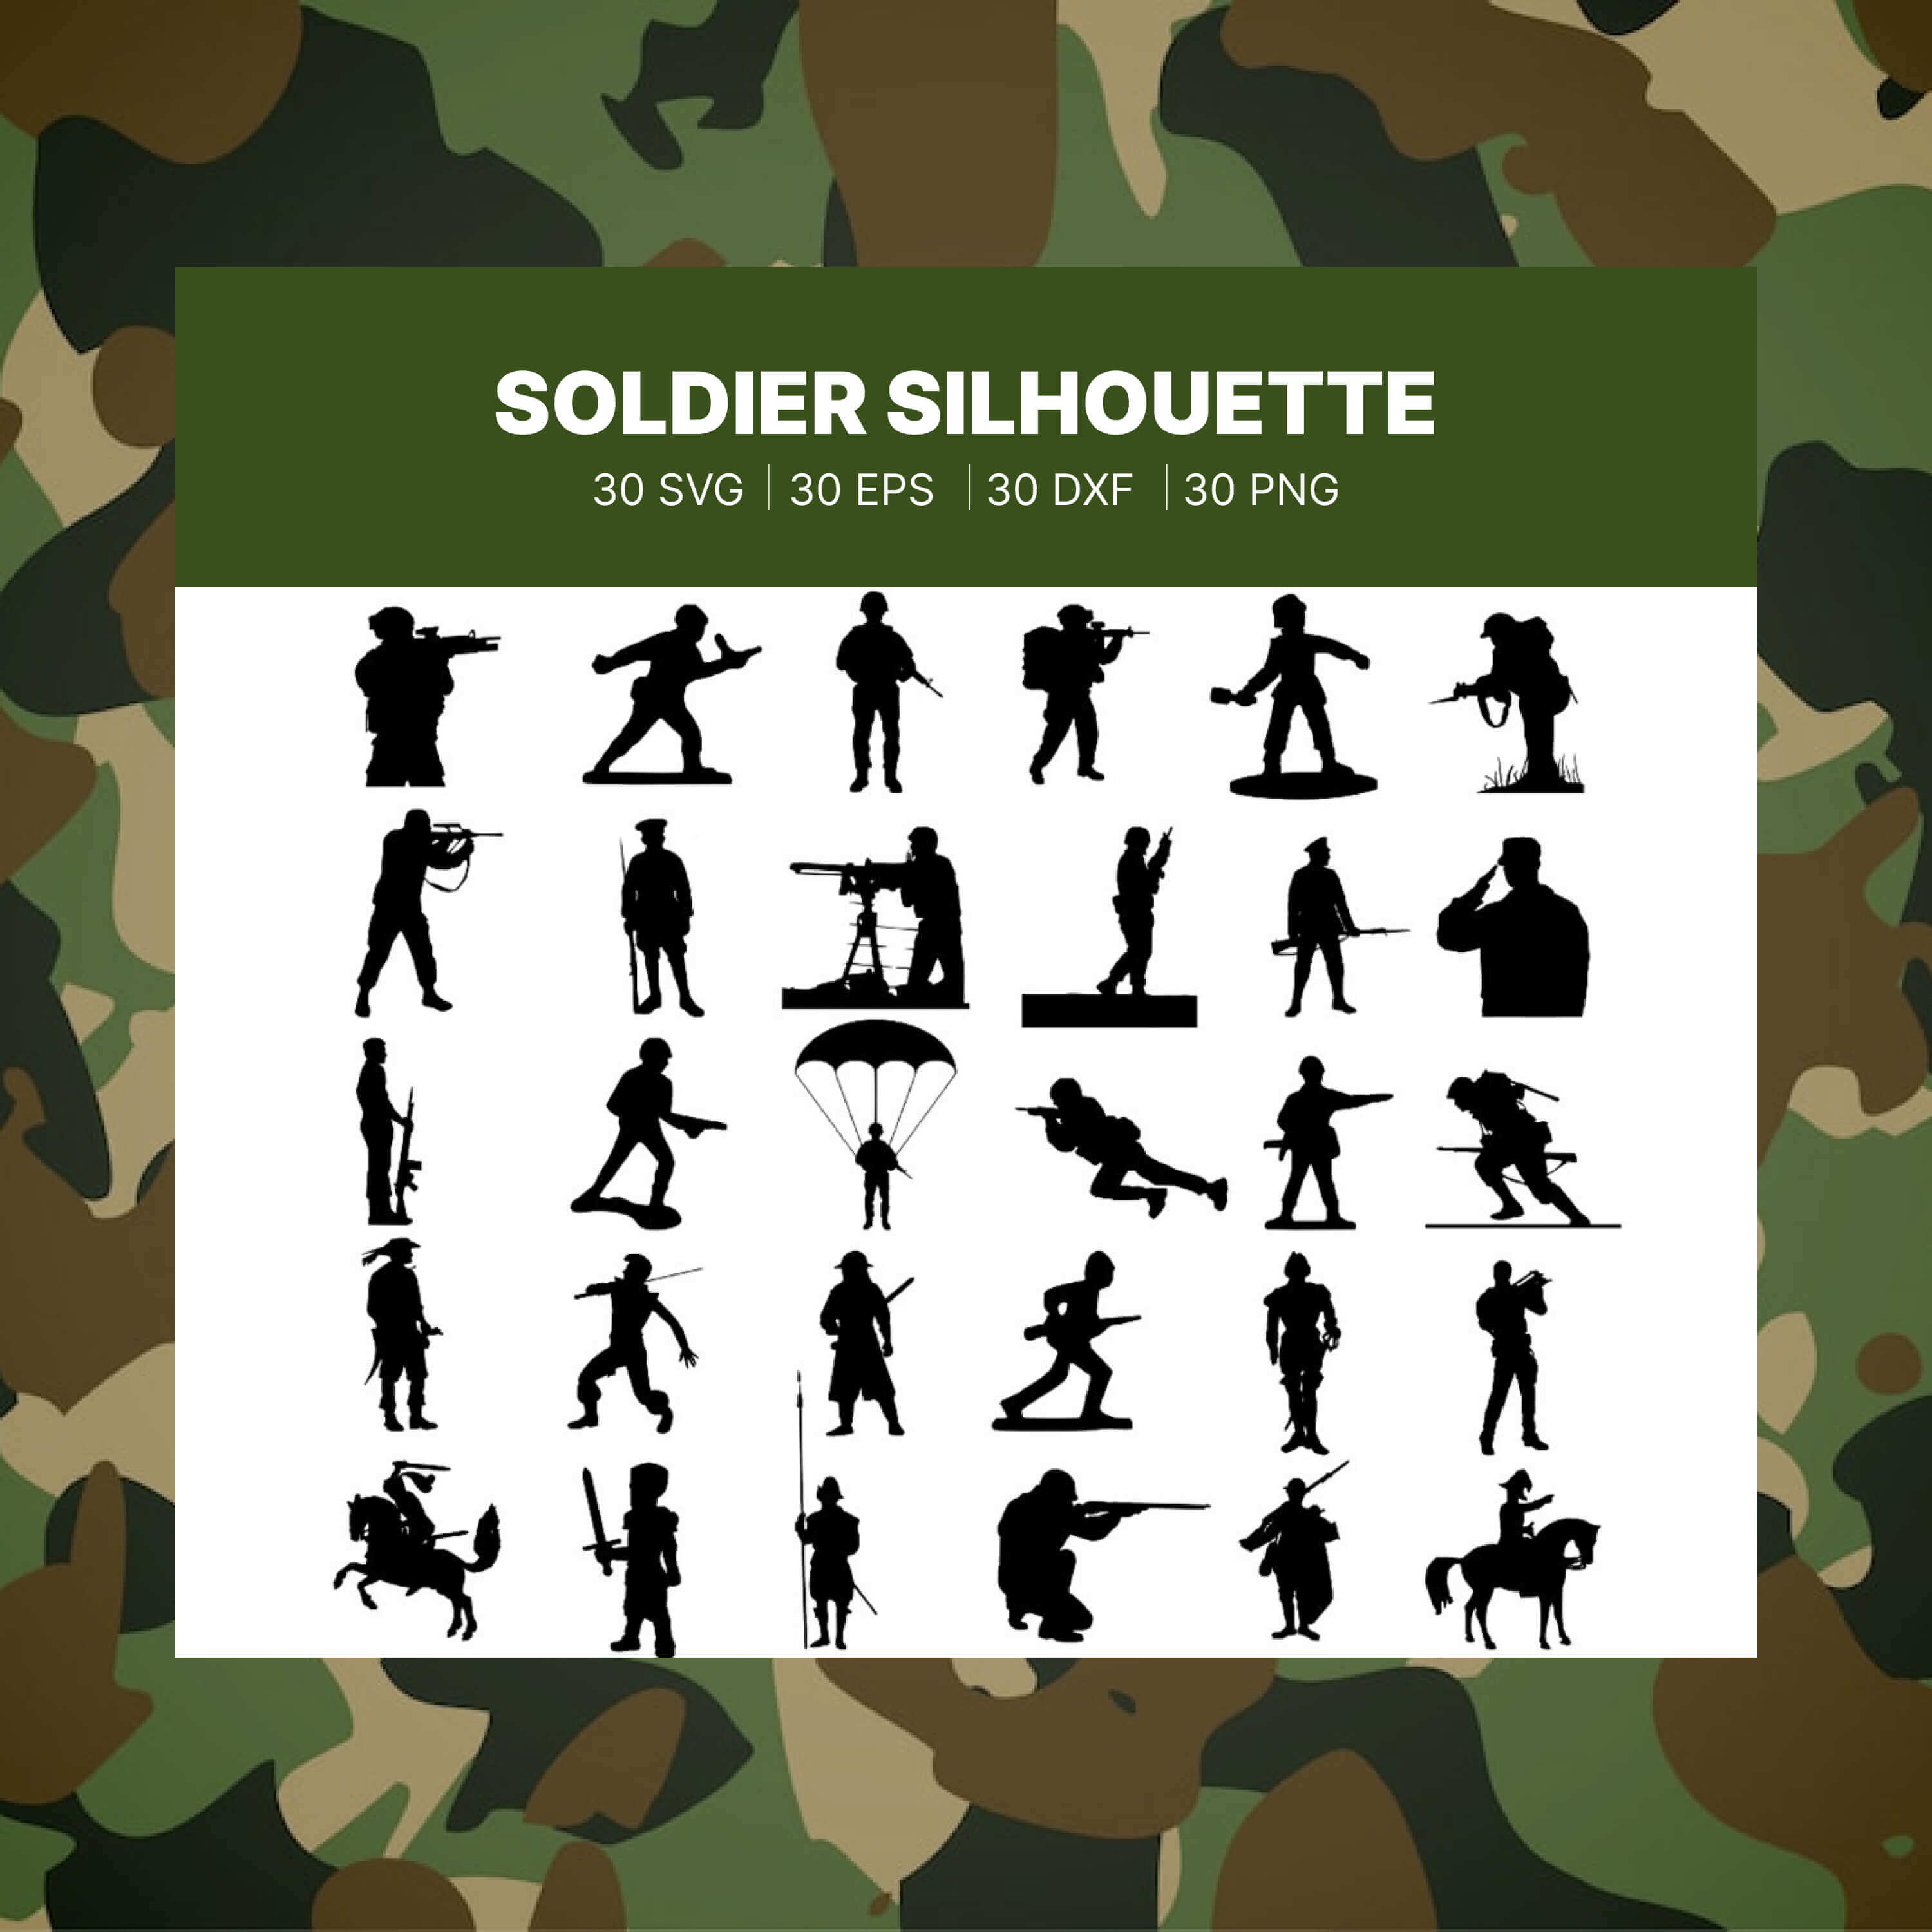 Silhouettes of soldiers on a green background.